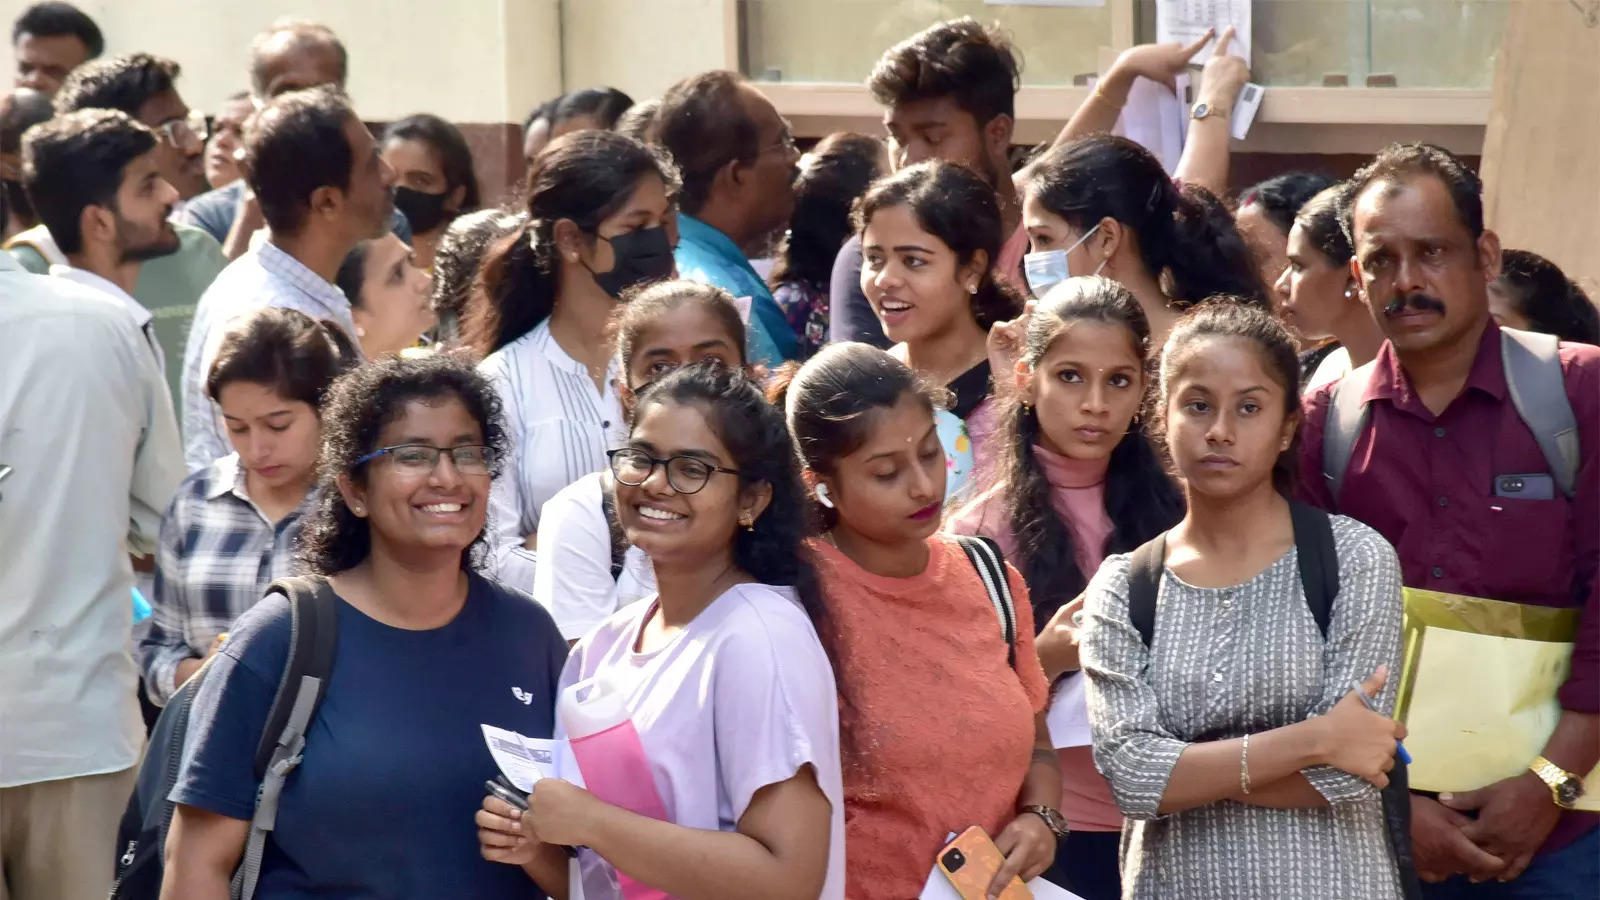 NTA announces revised NEET-UG, CUET-UG and PG exam dates and centres for Manipur candidates